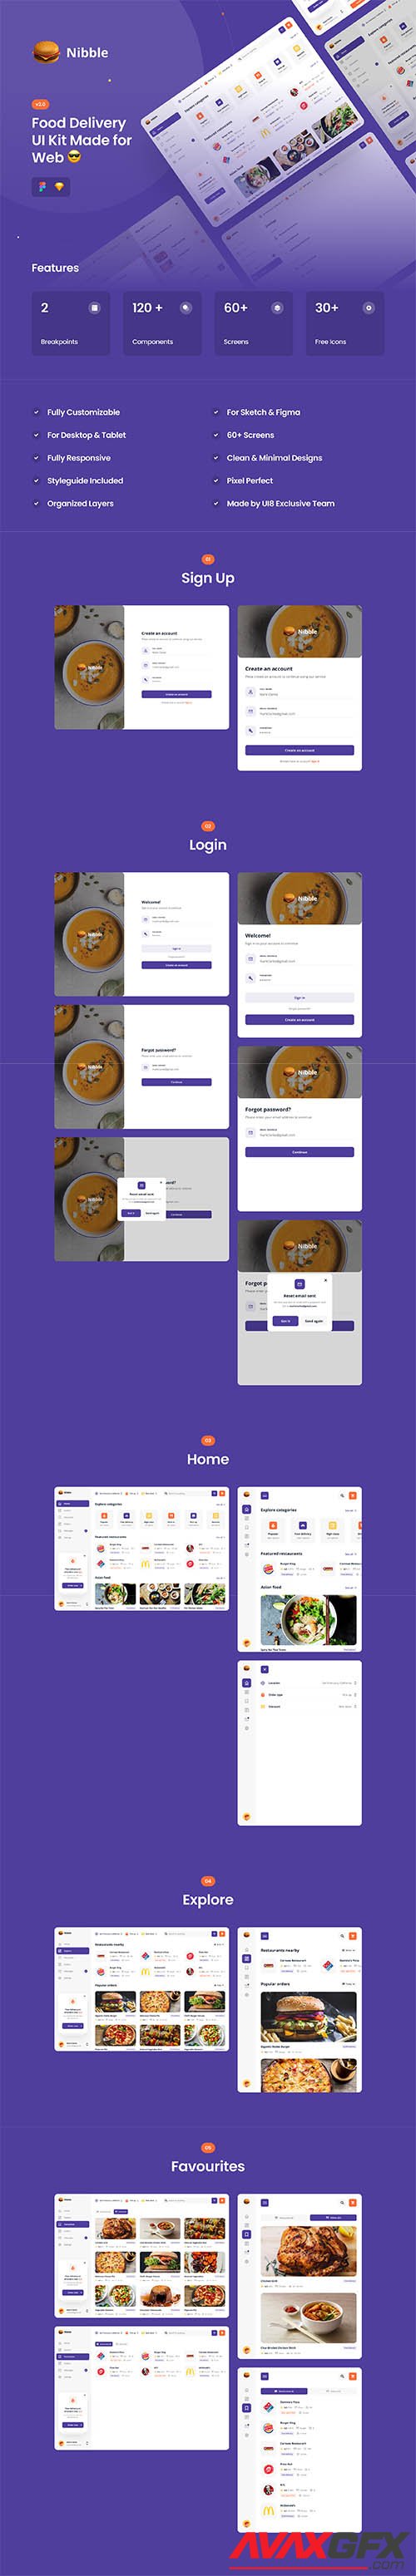 Nibble: Food Delivery Web UI Kit